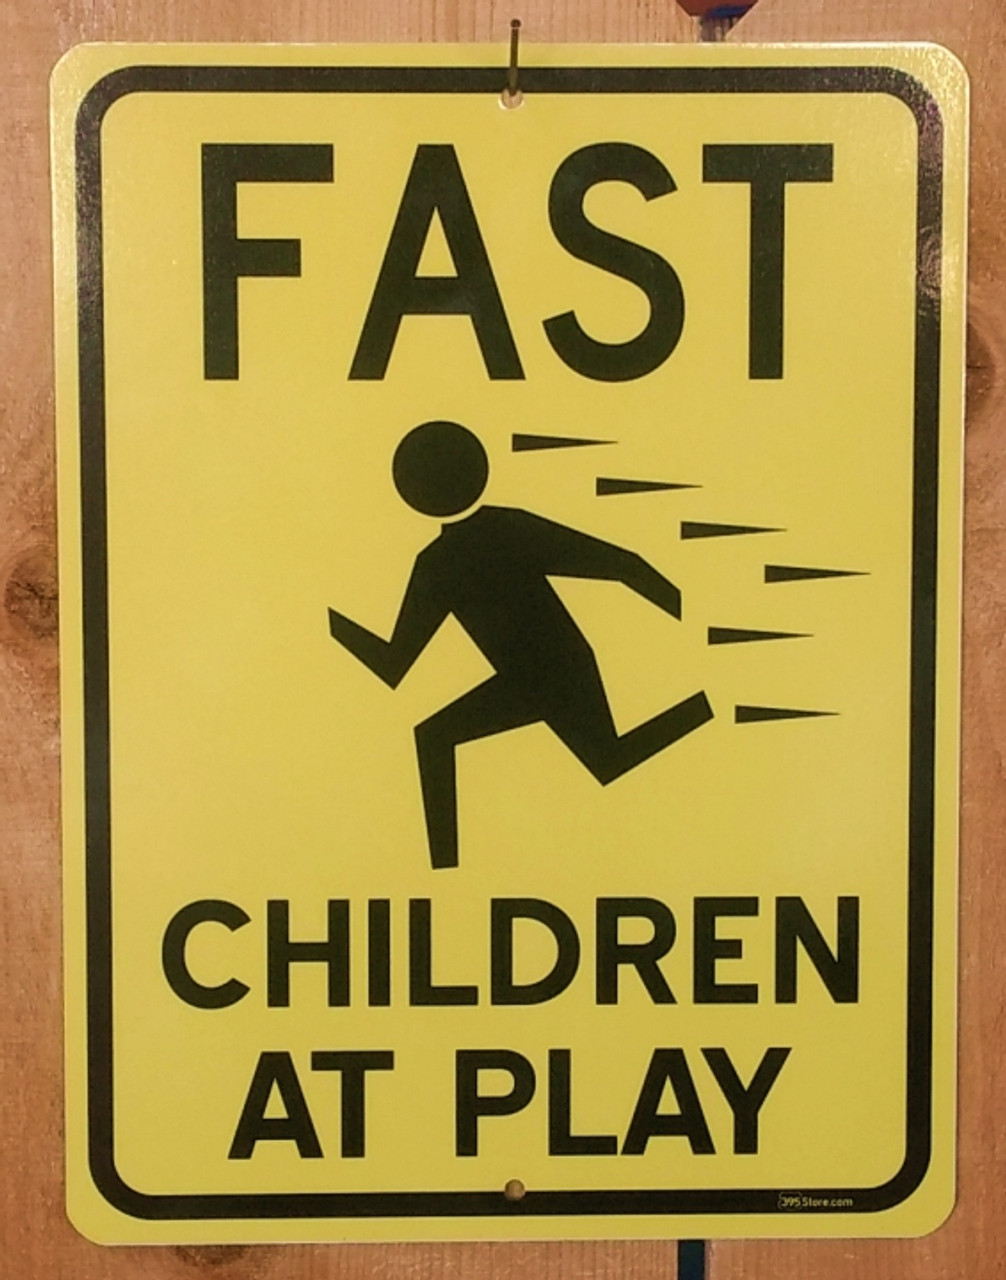 children at play sign